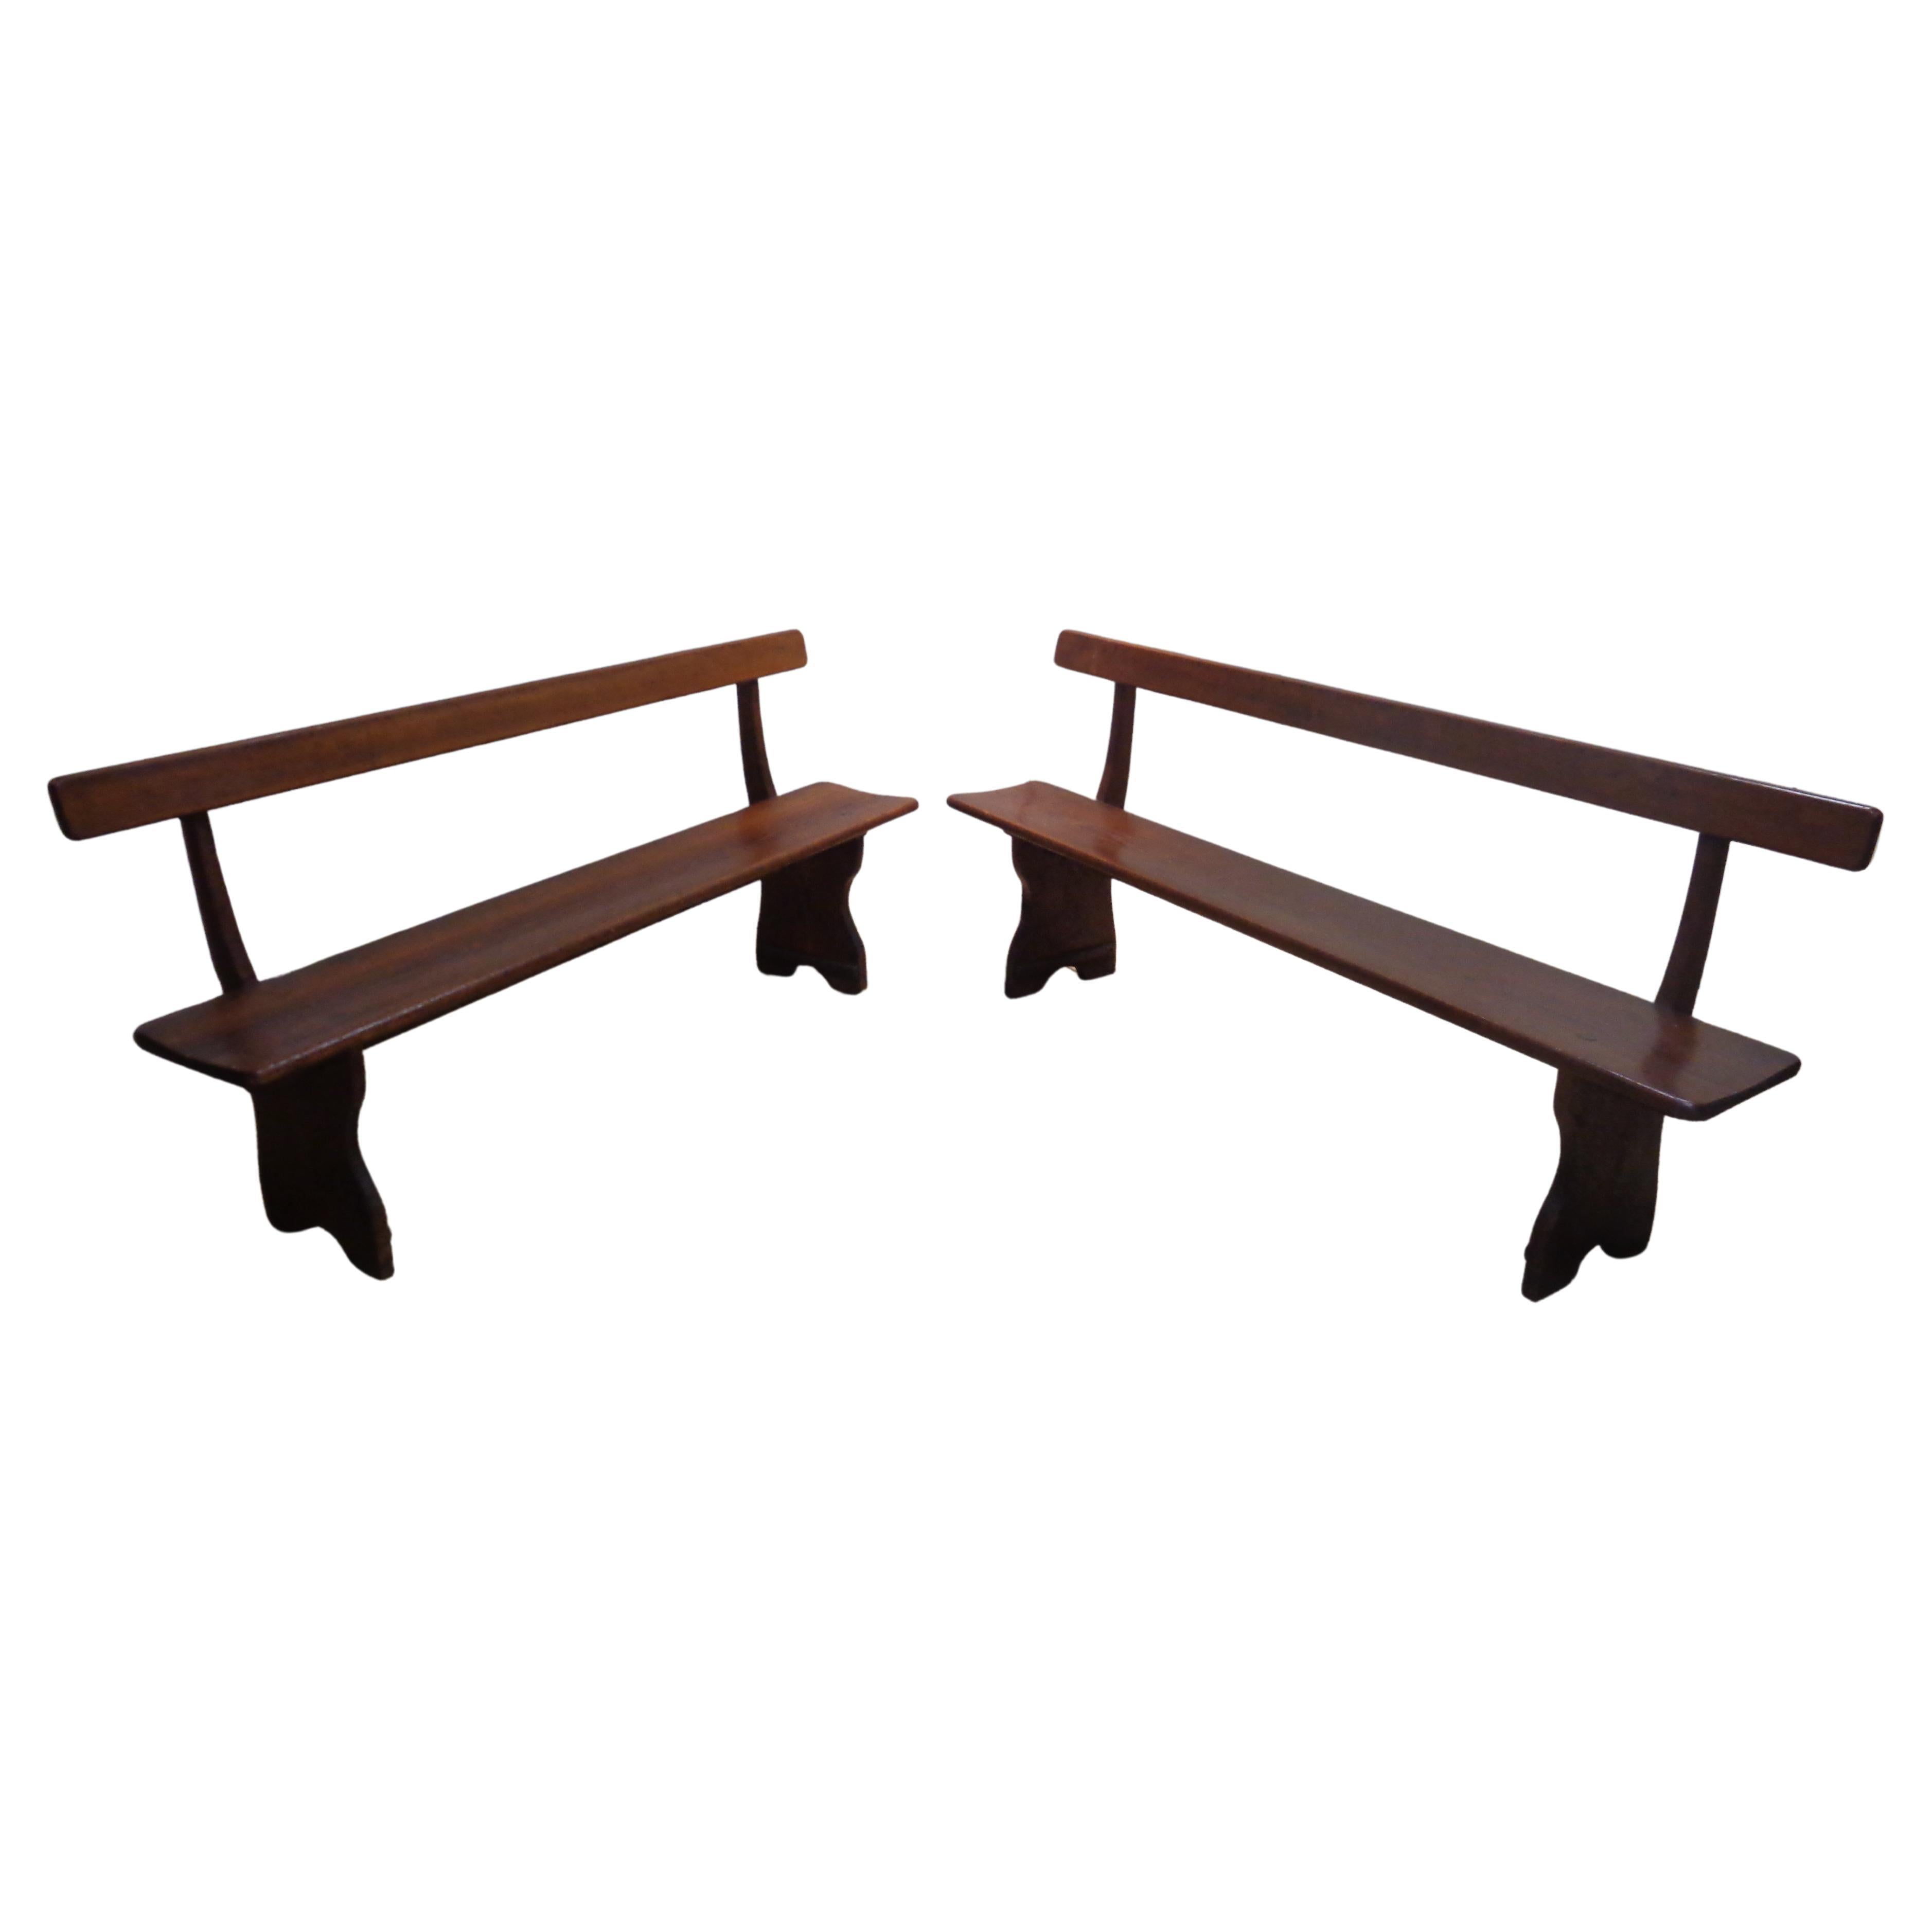 Exceptional pair of antique American country hardwood benches ( heart pine or douglas fir ) fine hand crafted dowel pegged construction / nicely grained / beautifully aged original rich color patina / graceful elongated sculptural form. One bench is